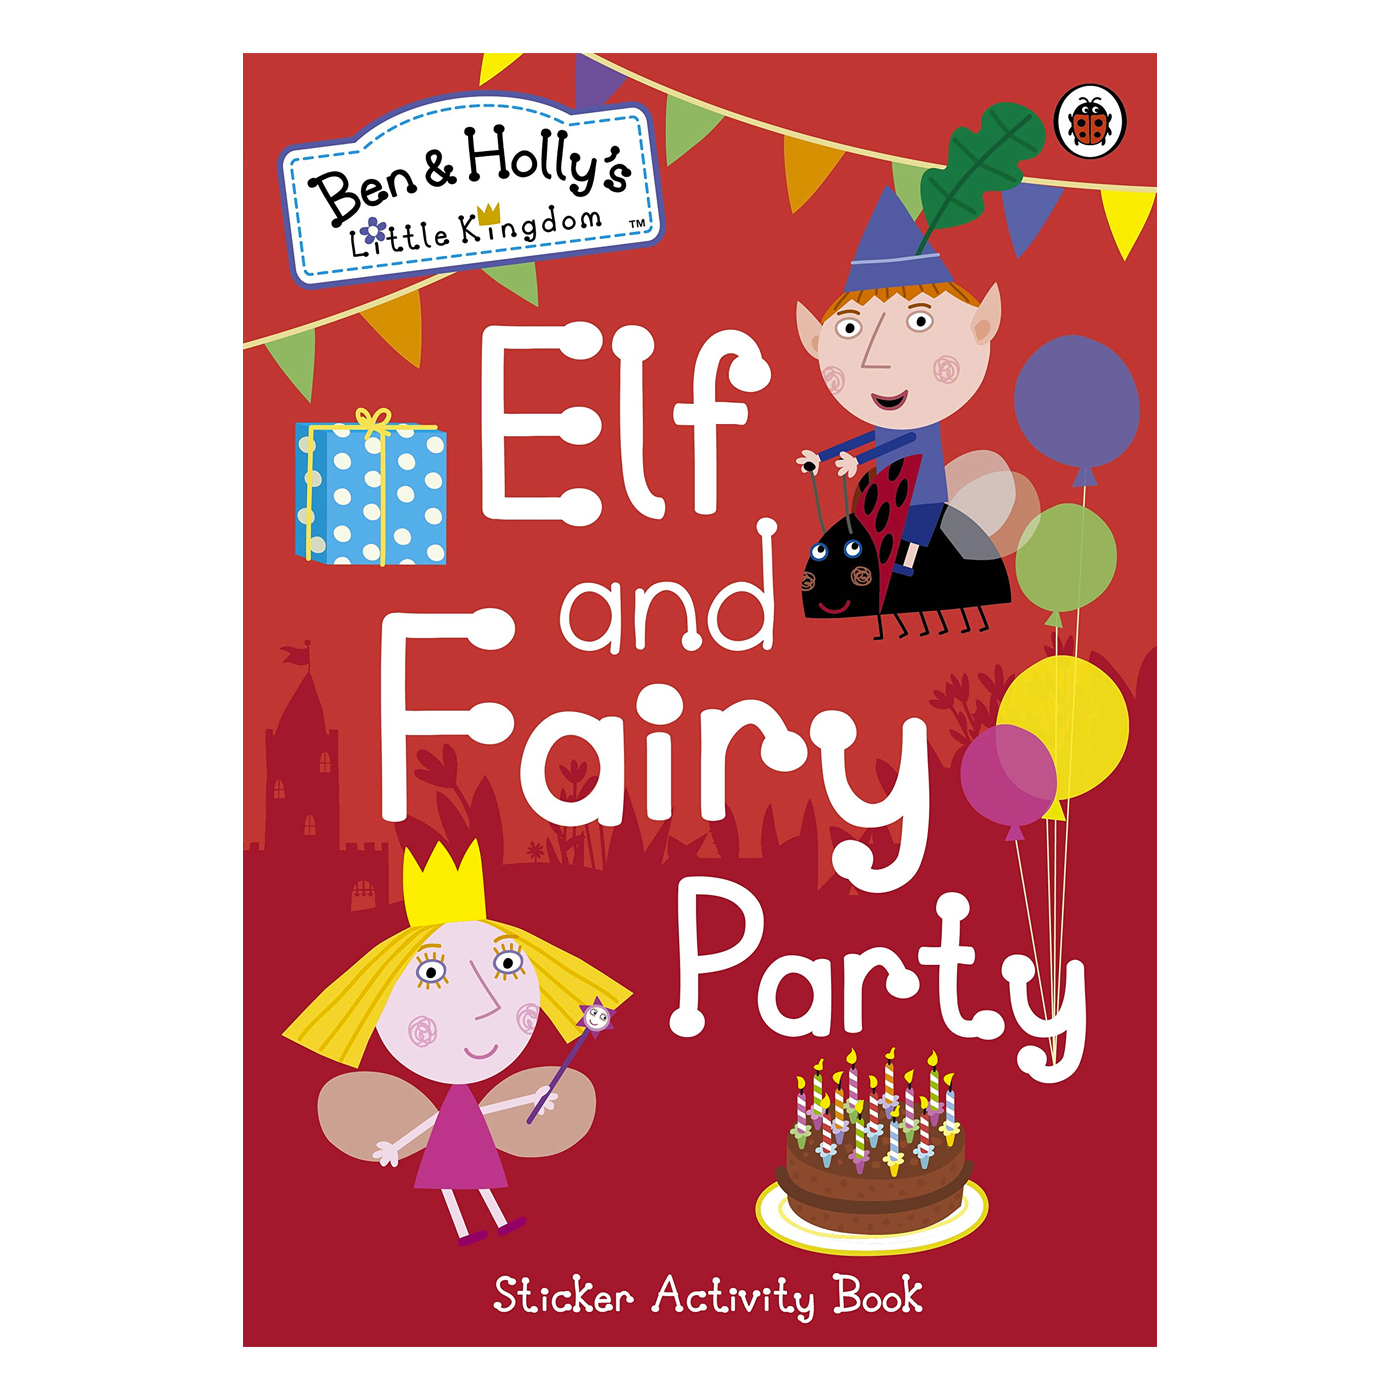  Ben And Hollys Little Kingdom: Elf And Fairy Party